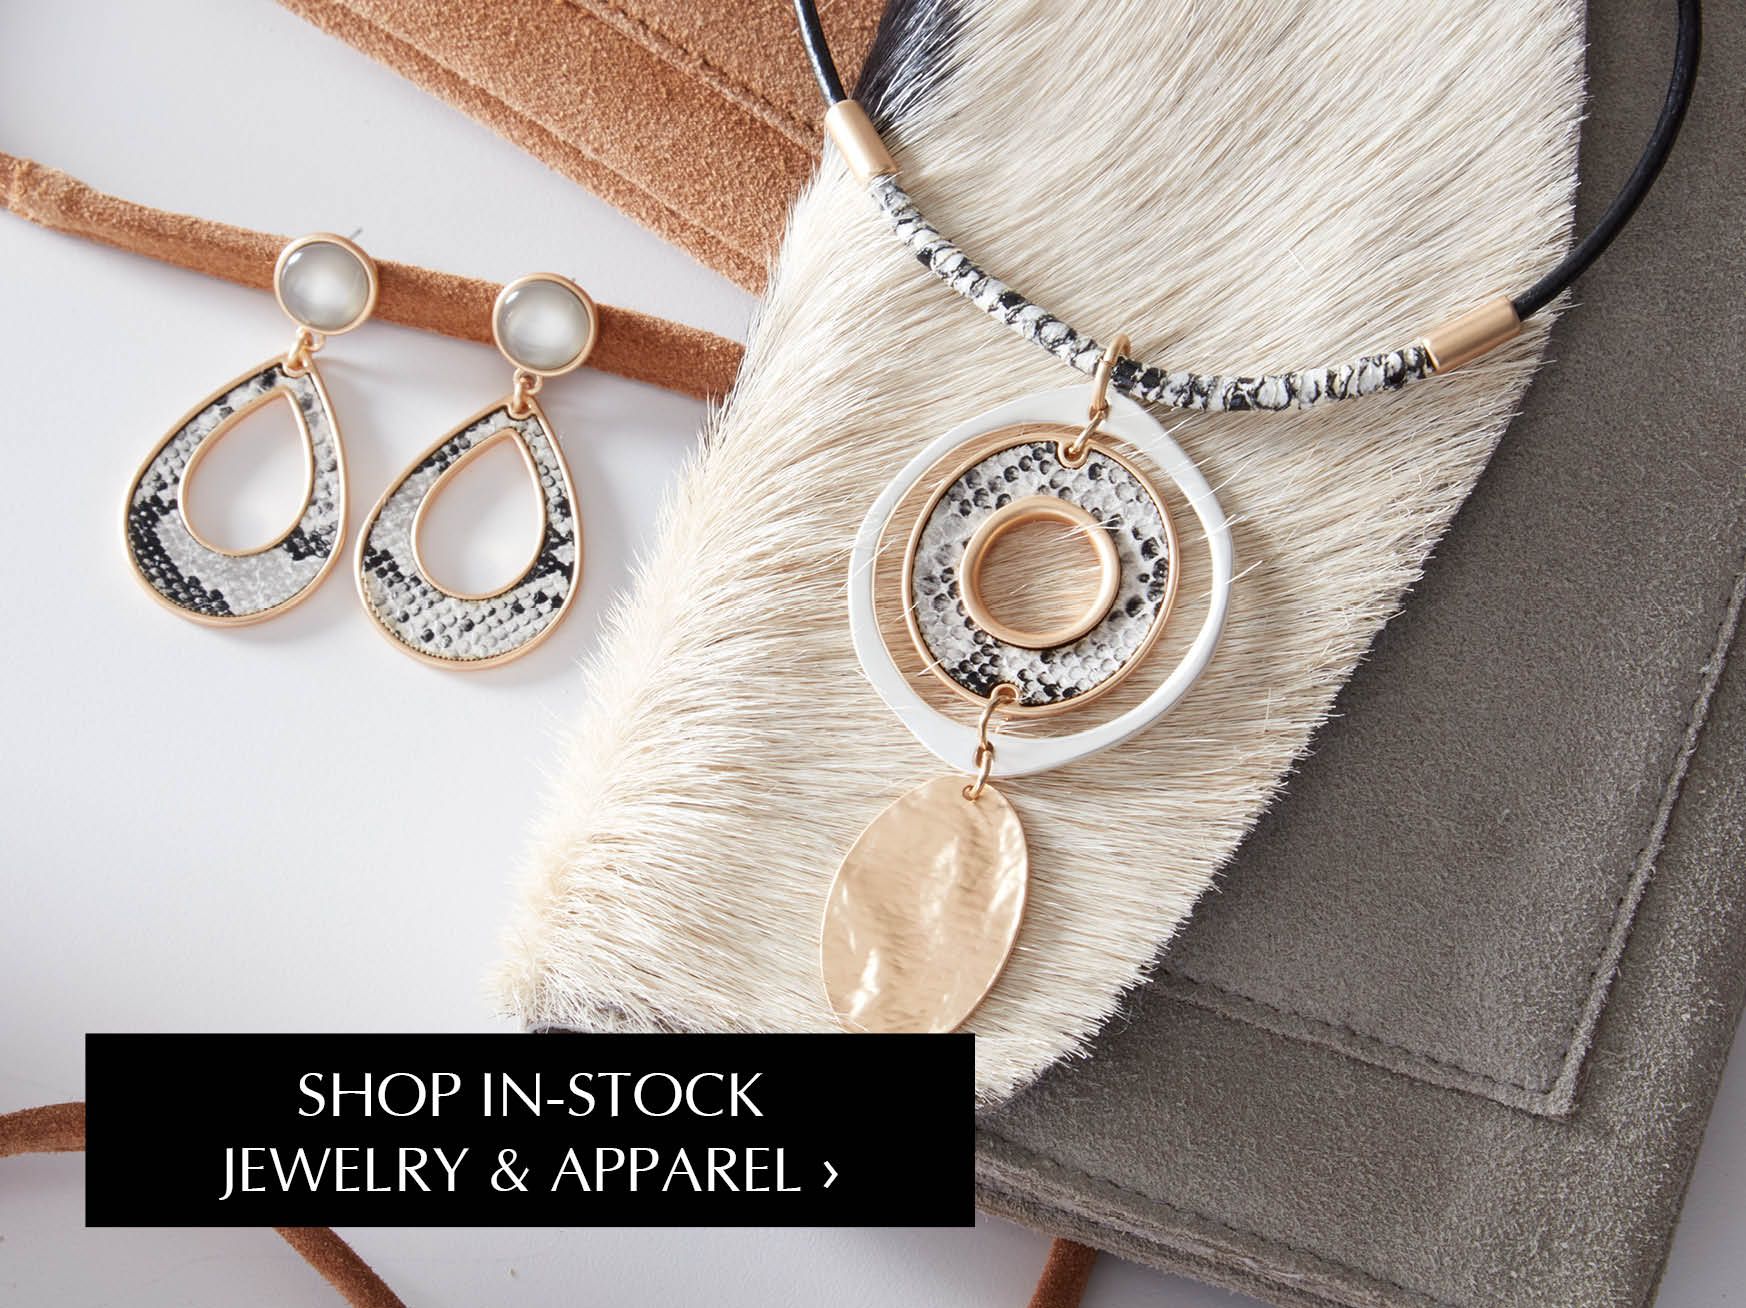 Shop In-Stock Jewelry and Apparel- Animal Fur Purse/ Handbag with animal print matching earrings and pendant necklace